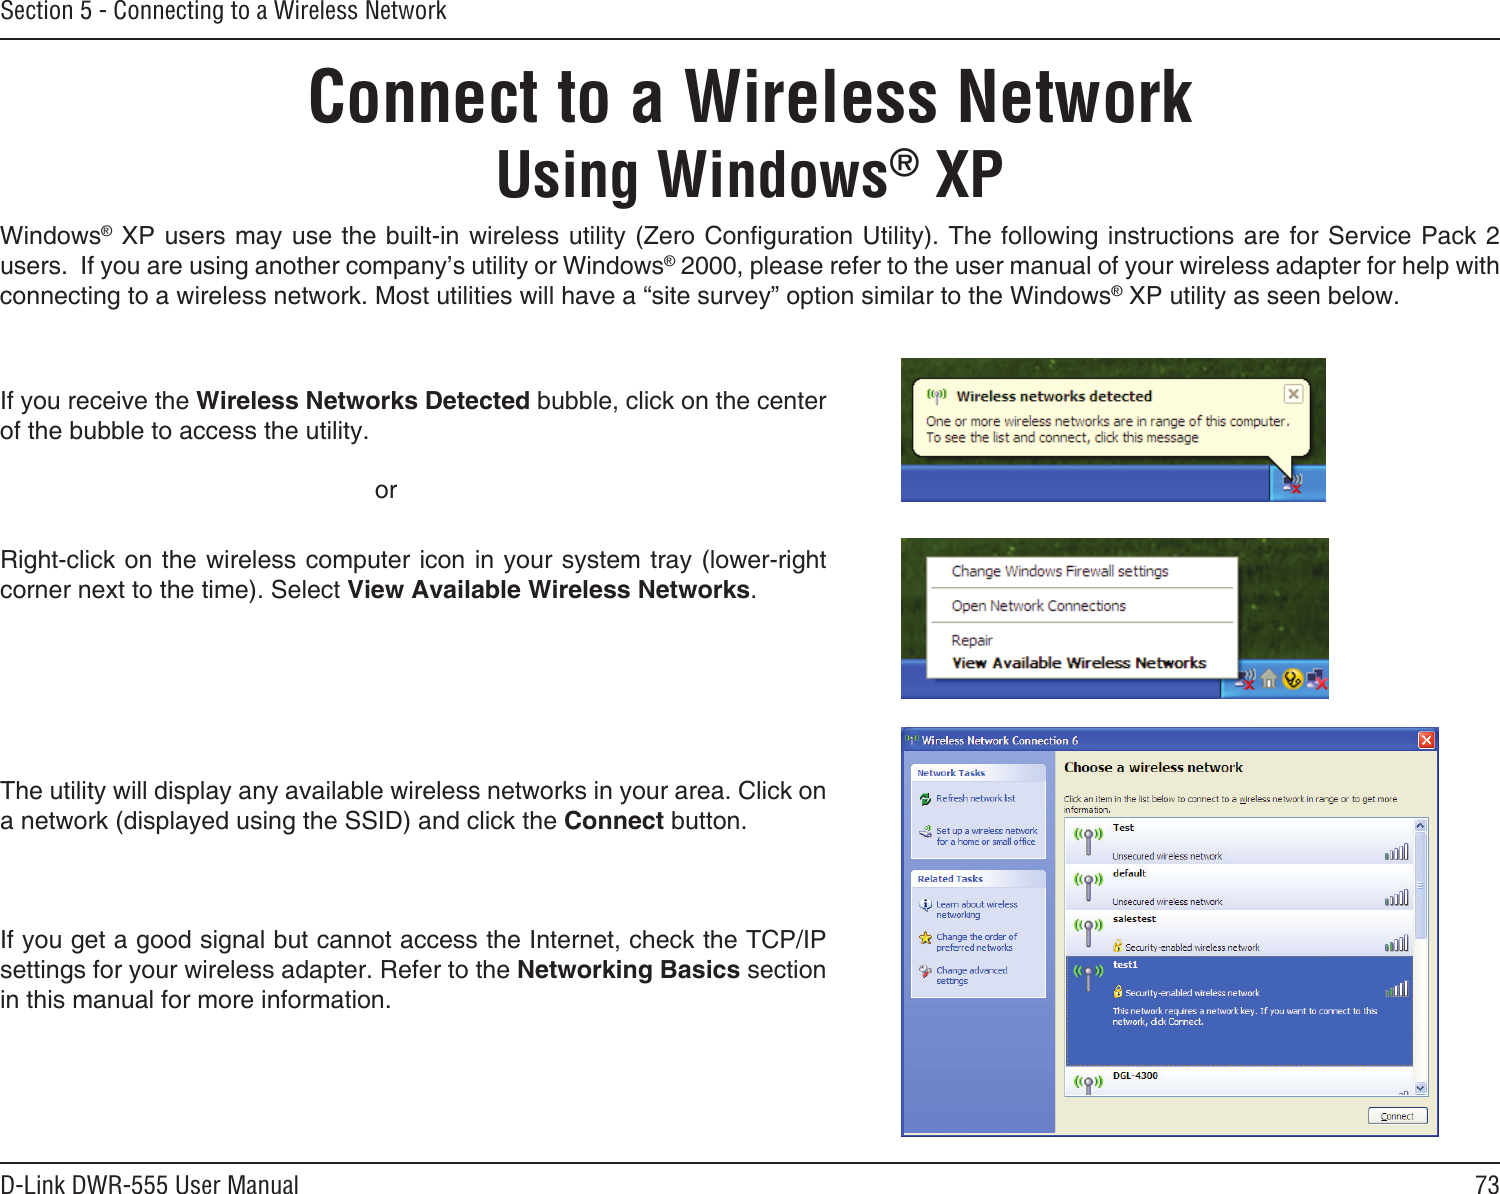 73D-Link DWR-555 User ManualSection 5 - Connecting to a Wireless NetworkConnect to a Wireless NetworkUsing Windows® XPWindows® XP users may use the built-in wireless utility (Zero Conguration Utility). The following instructions are for Service Pack 2 users.  If you are using another company’s utility or Windows® 2000, please refer to the user manual of your wireless adapter for help with connecting to a wireless network. Most utilities will have a “site survey” option similar to the Windows® XP utility as seen below.Right-click on the wireless computer icon in your system tray (lower-right corner next to the time). Select View Available Wireless Networks.If you receive the Wireless Networks Detected bubble, click on the center of the bubble to access the utility.     orThe utility will display any available wireless networks in your area. Click on a network (displayed using the SSID) and click the Connect button.If you get a good signal but cannot access the Internet, check the TCP/IP settings for your wireless adapter. Refer to the Networking Basics section in this manual for more information.